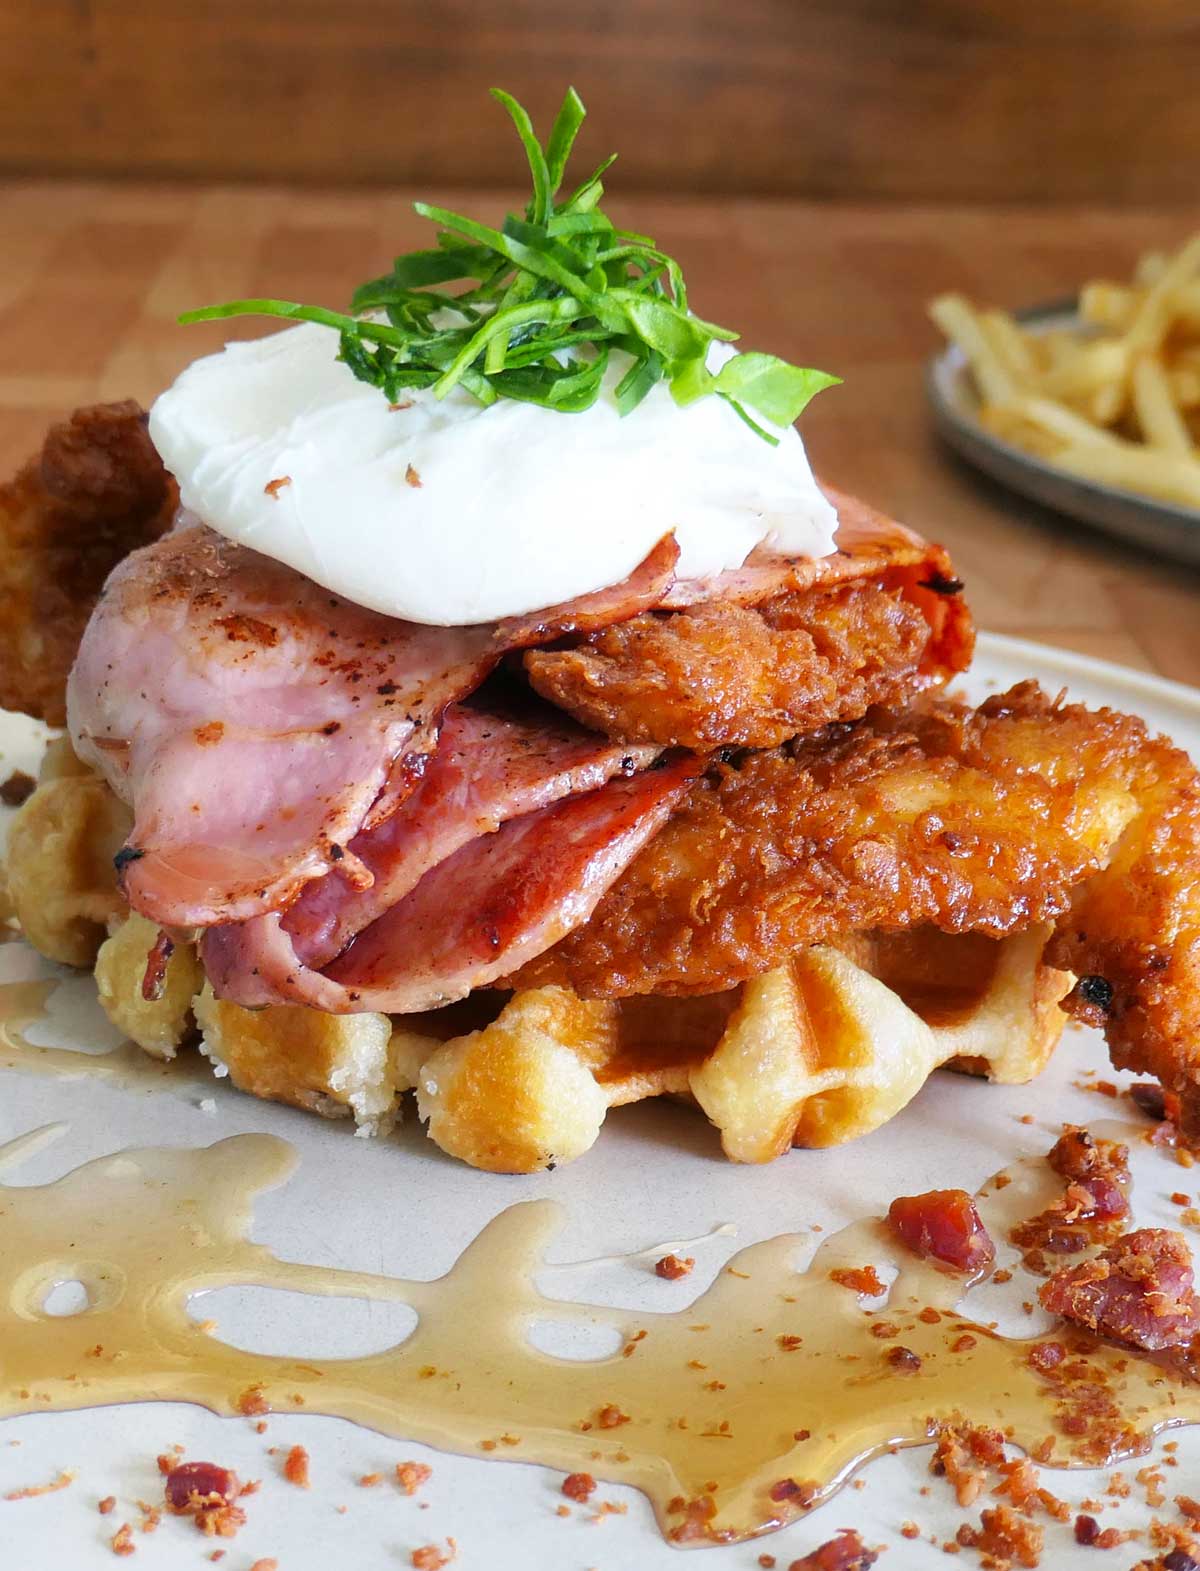 Chicken and waffles with poached egg (Smelter Cafe)